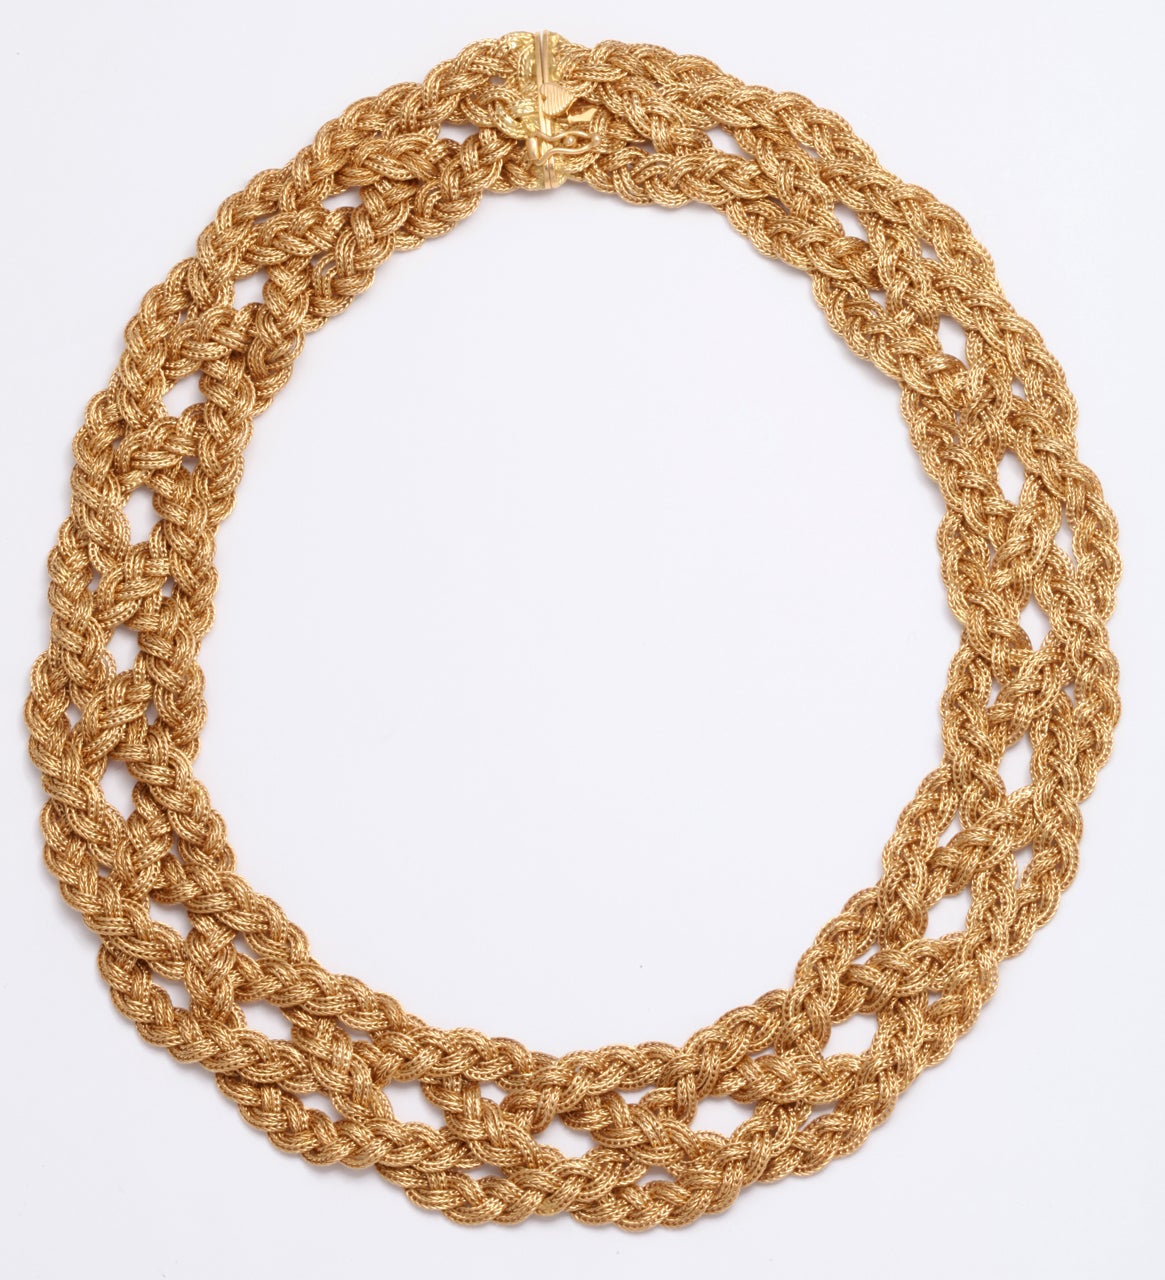 A fabulous Tiffany and Company 18 kt gold woven necklace